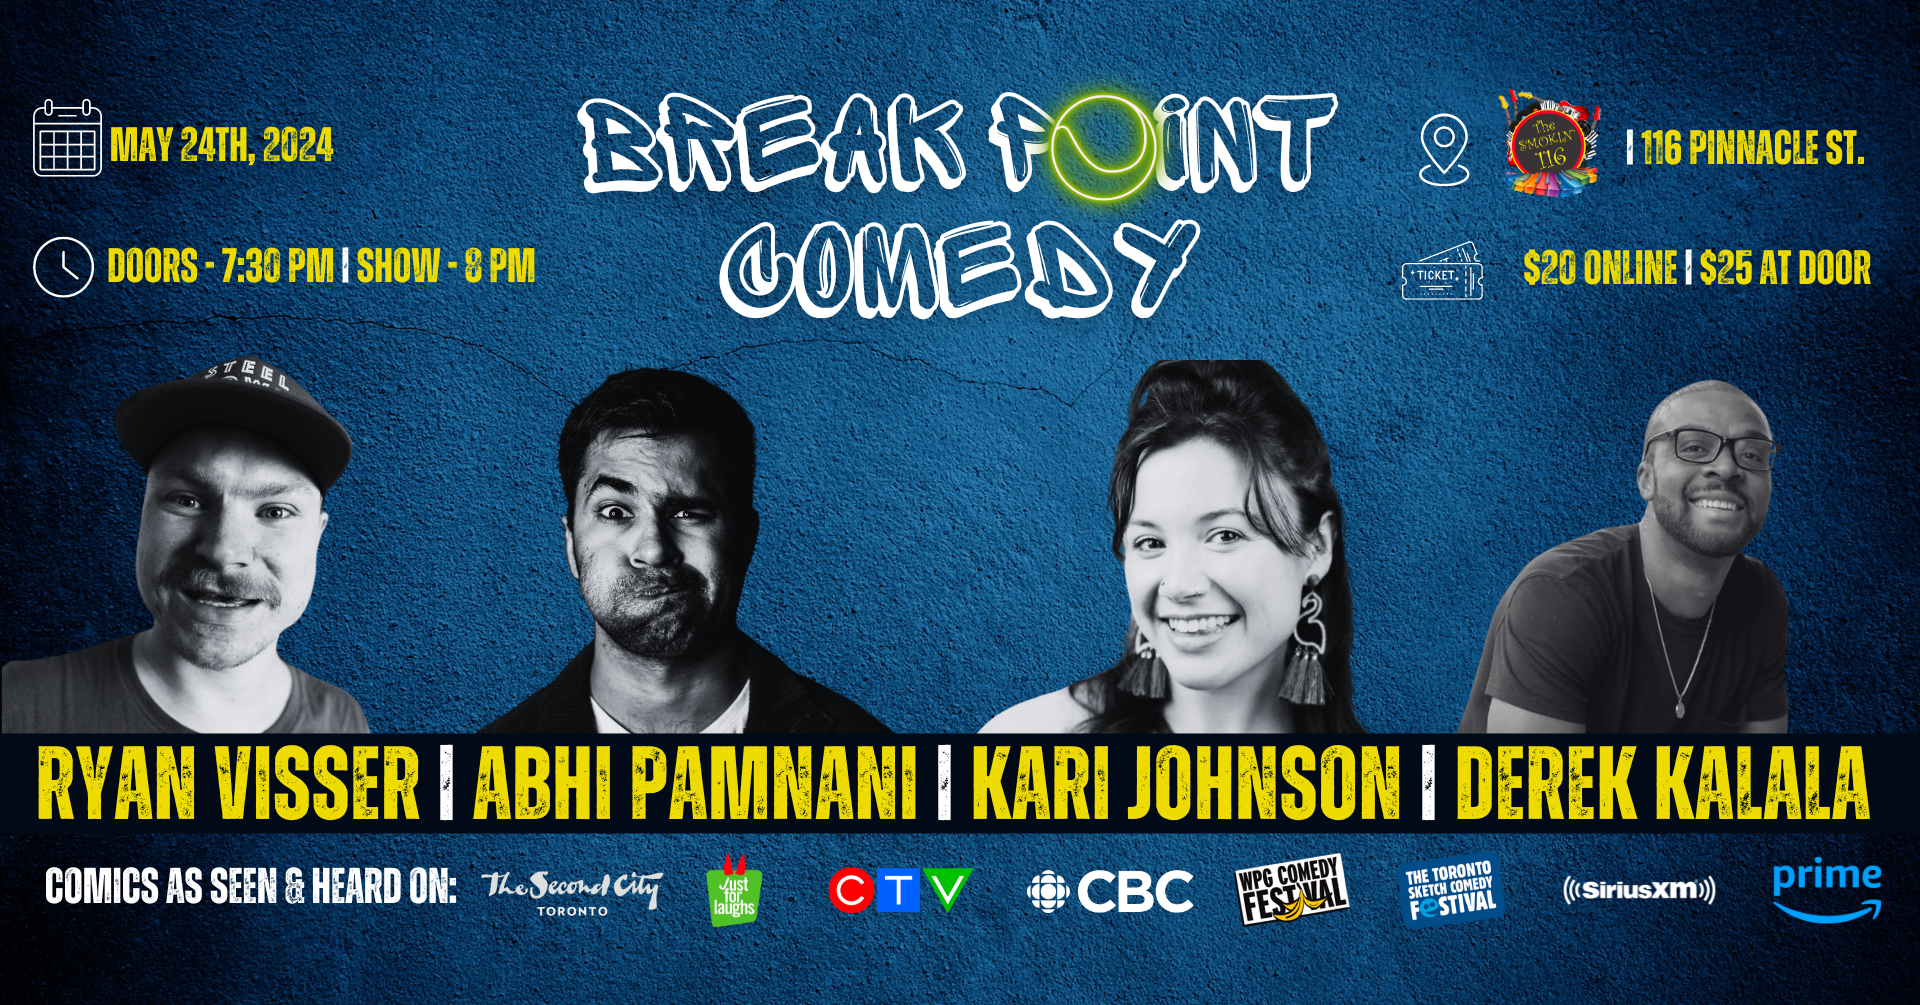 Poster titled "Break Point Comedy" has photos of performers.